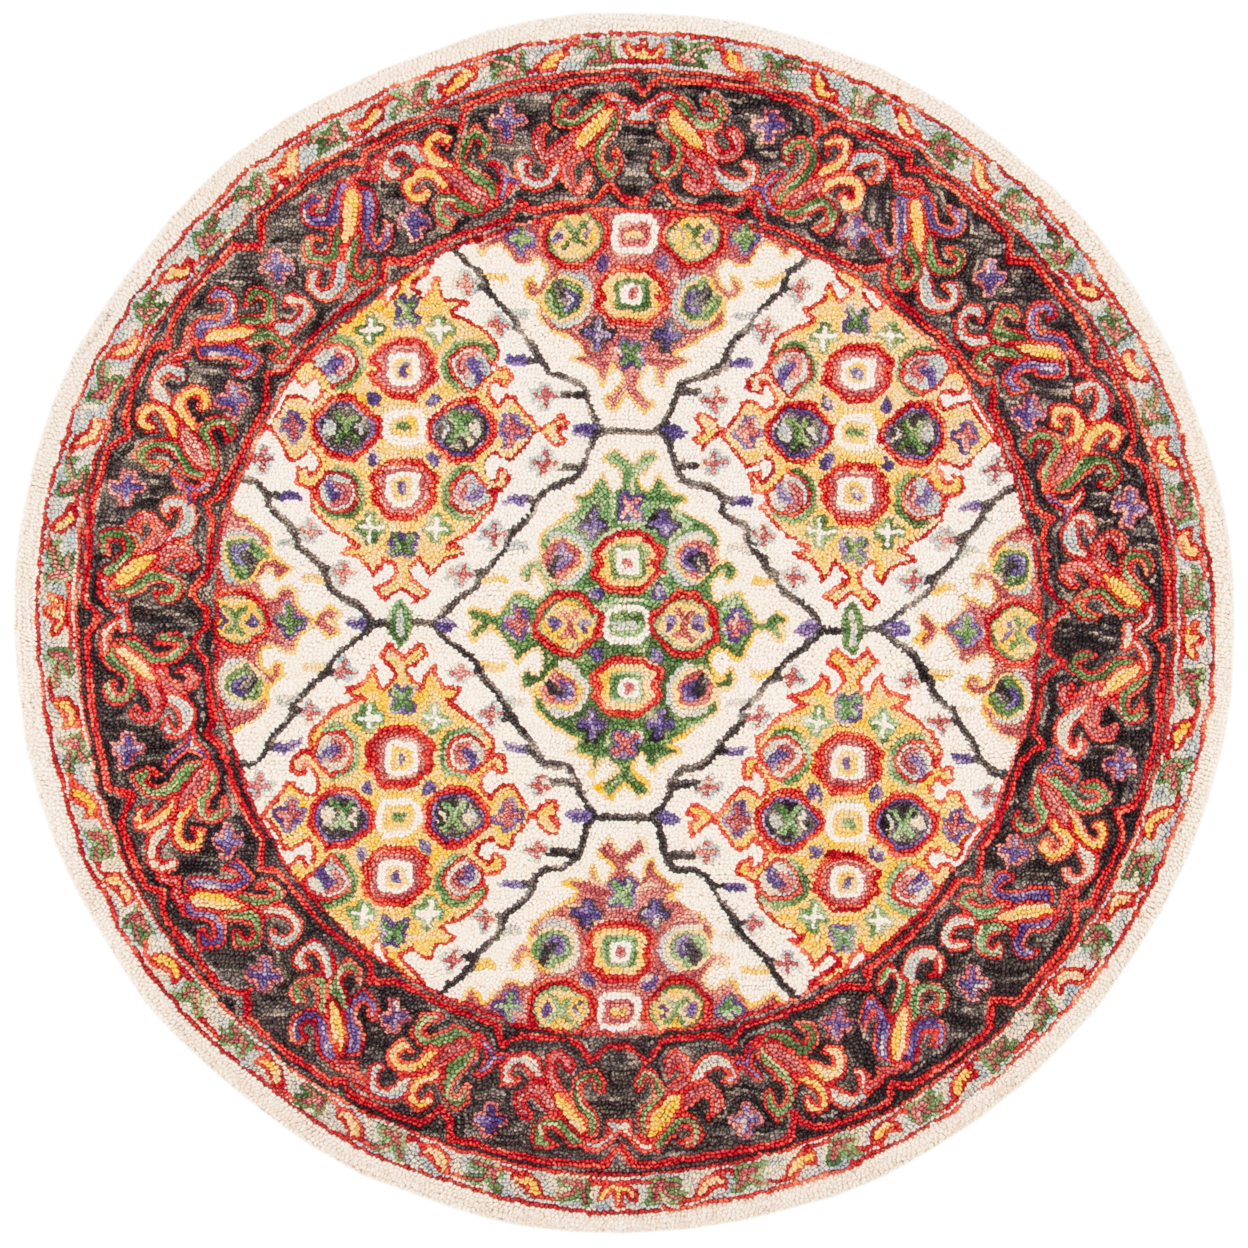 SAFAVIEH Trace Collection TRC524A Handmade Ivory/Red Rug - 6' Round